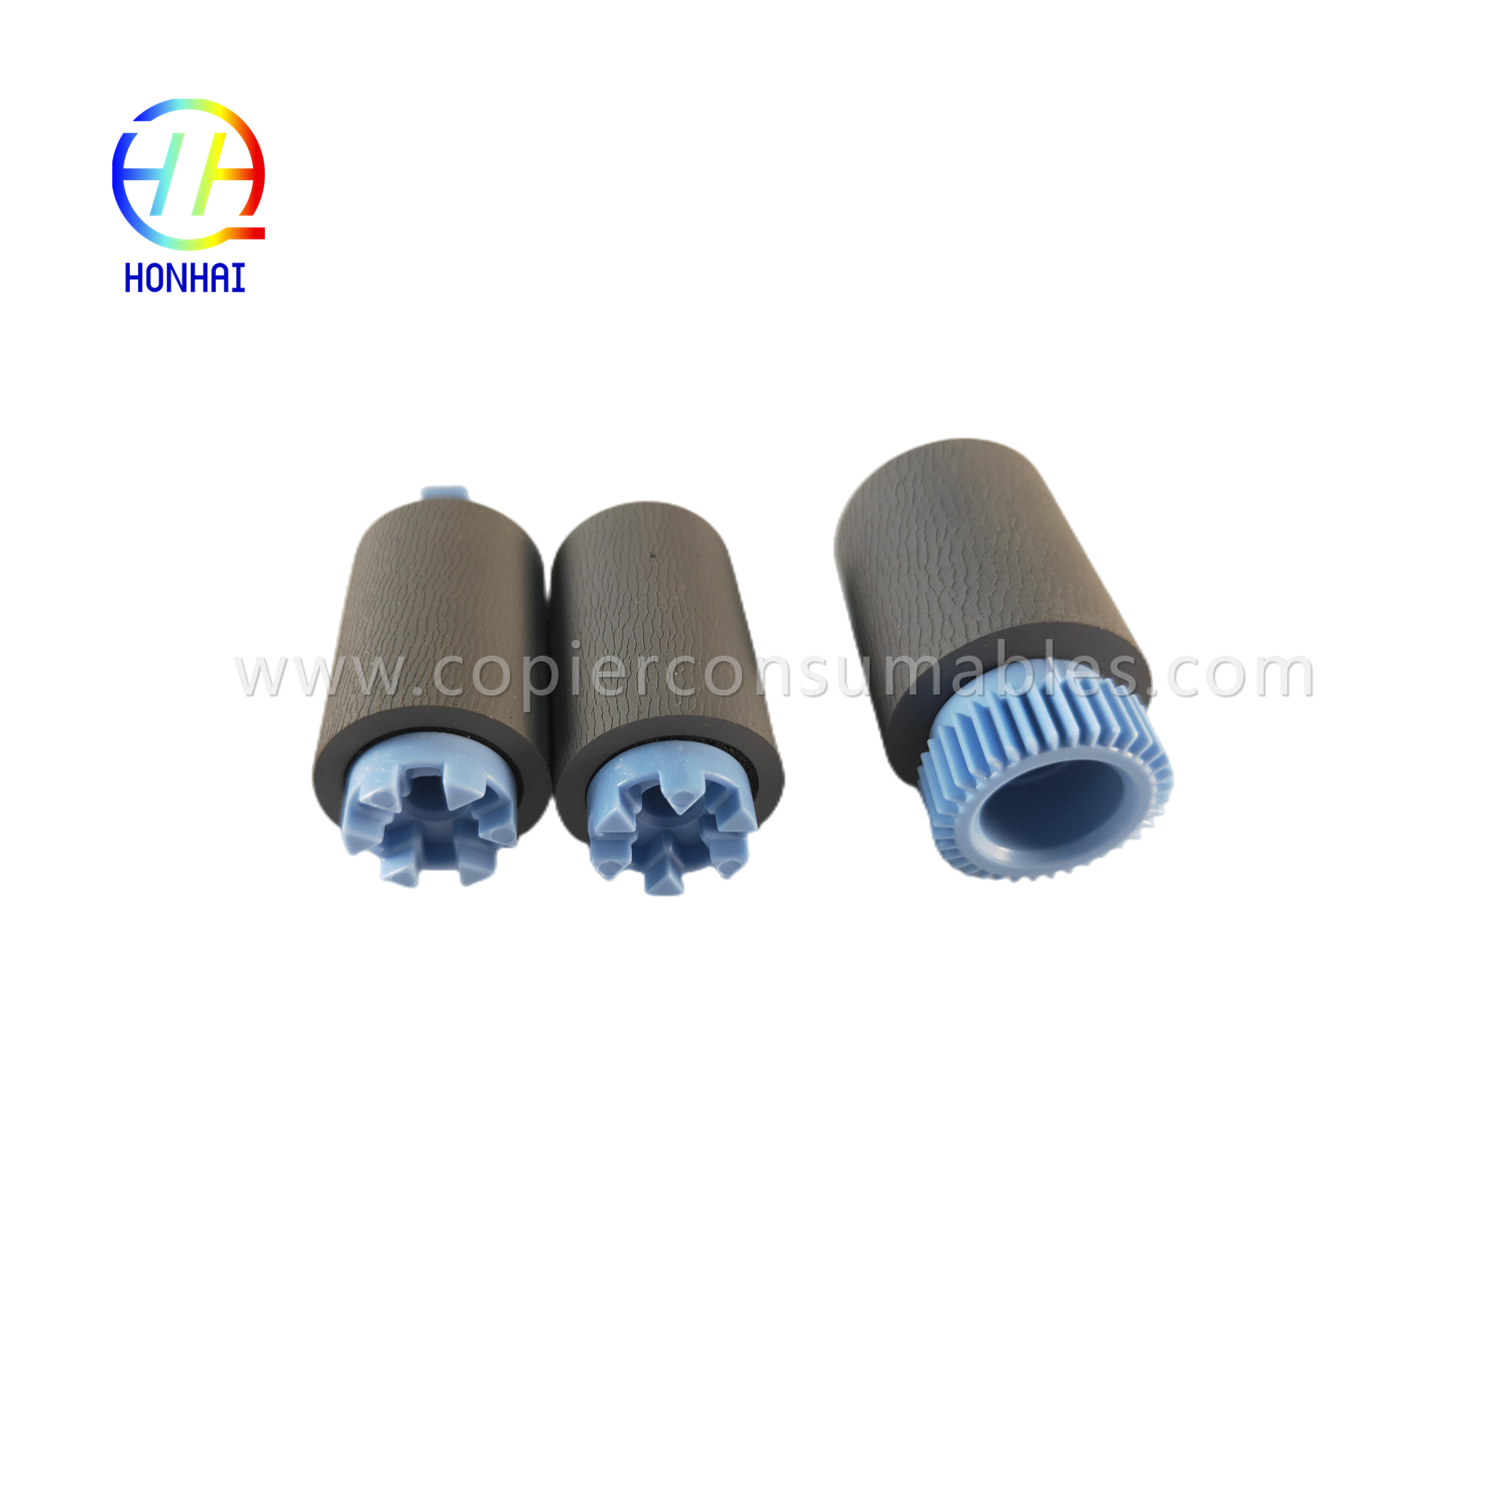 https://www.copierconsumables.com/tray-2-5-pickup-feed-separation-roller-set-for-hp-a7w93-67082-mfp-785f-780dn-e77650z-e77660z-e77650dn-e77650dn-e776774 p77750z-p77760z-p75050dn-p75050dw-prodott/